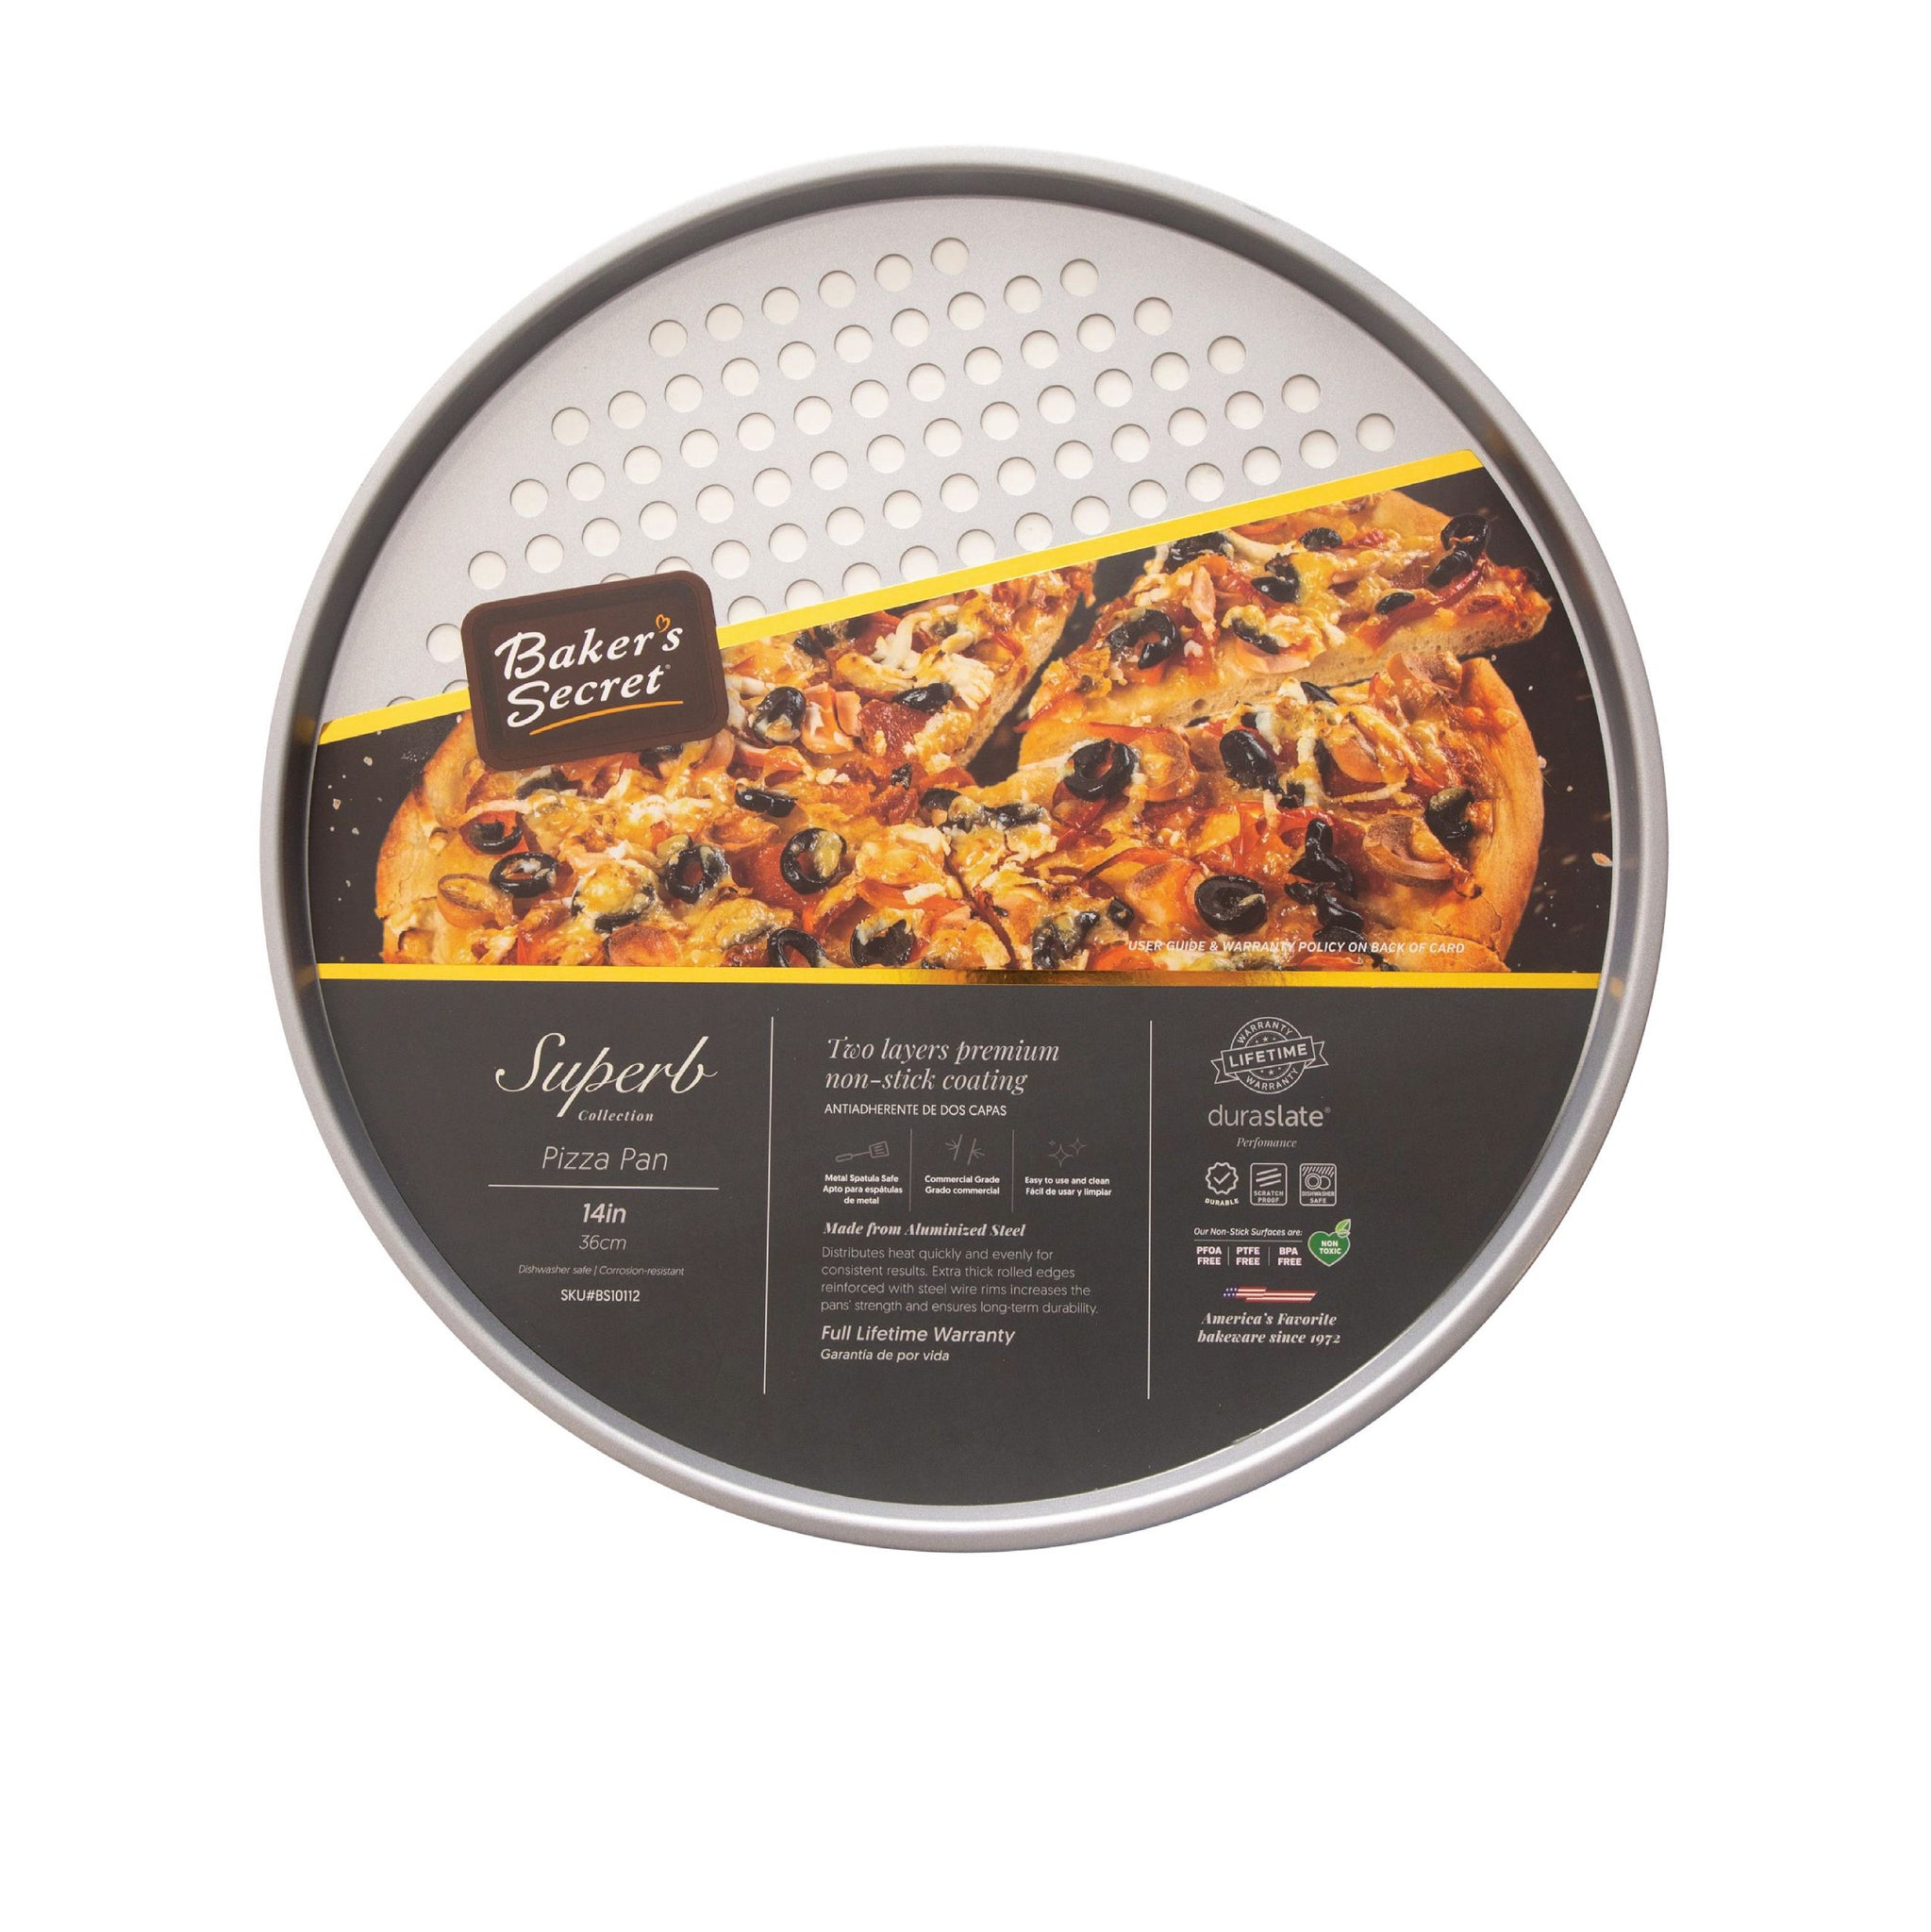 Chef Select Pizza Crisper Pan, 14-inch Round, Large size, Steel, Non-Stick, Perforated - Pizza, Fries, Bread, Large Cookies